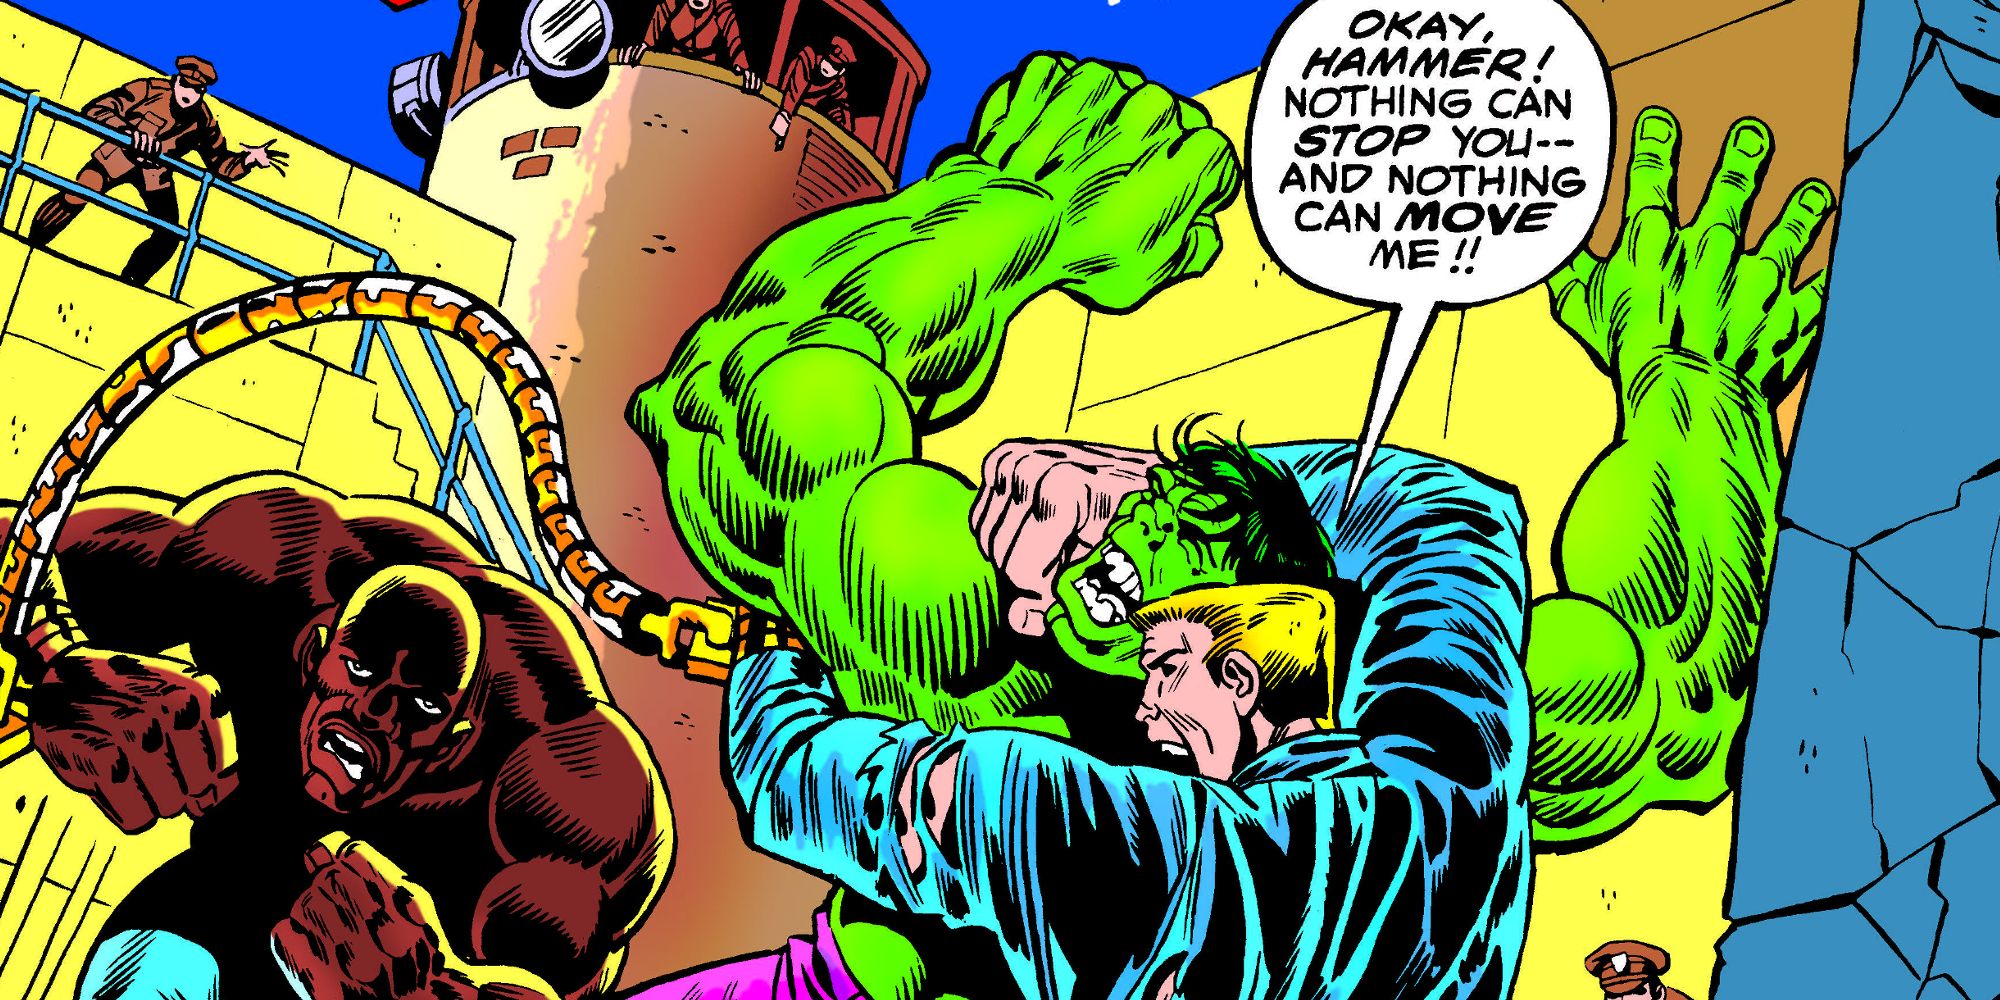 The Hulk grapples with bad guys